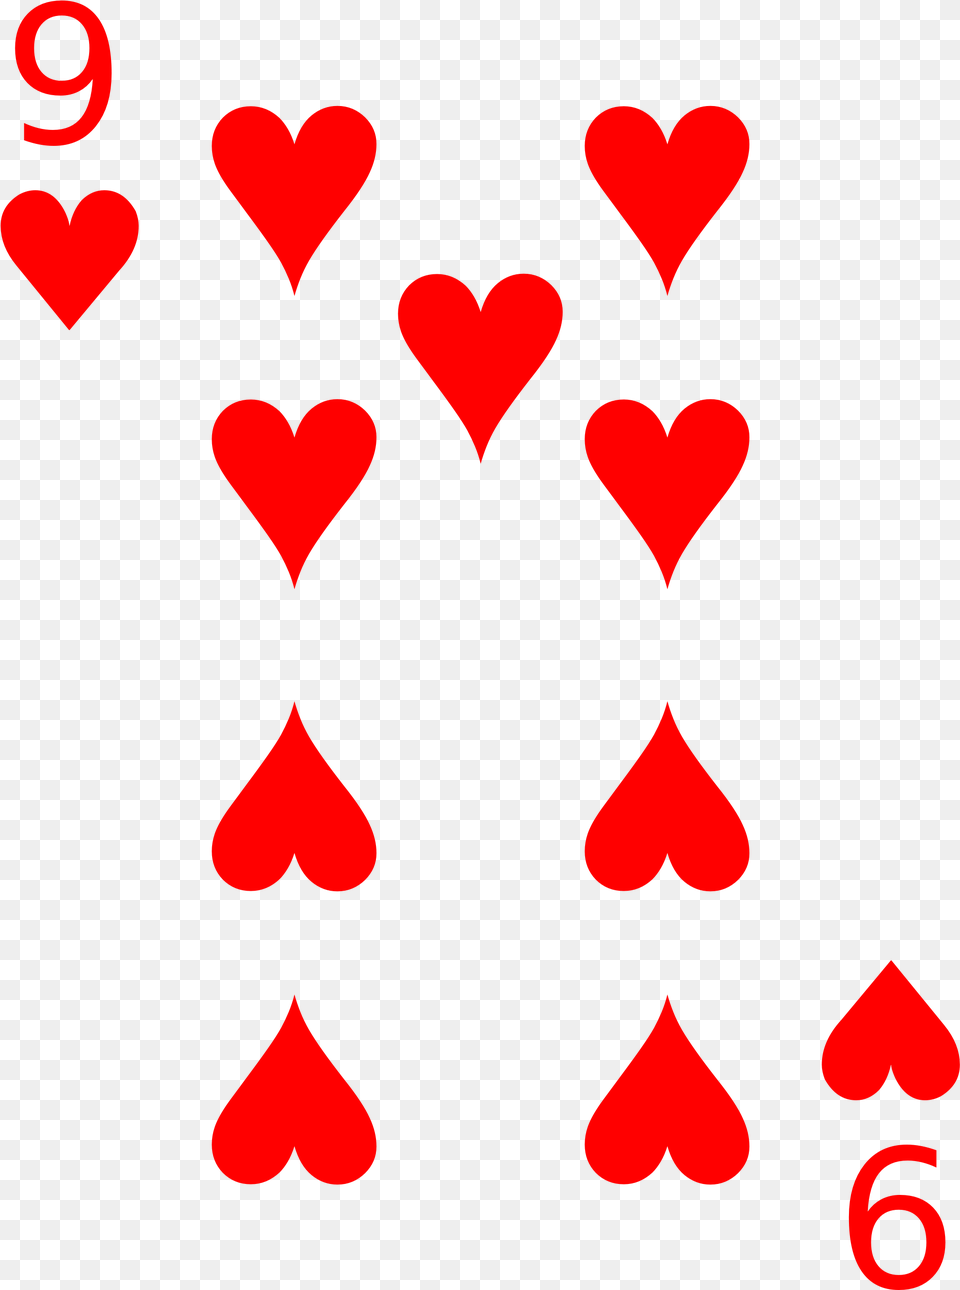 Banner Library File Cards Heart Wikimedia Commons Open Playing Cards 5 Of Hearts Free Png Download